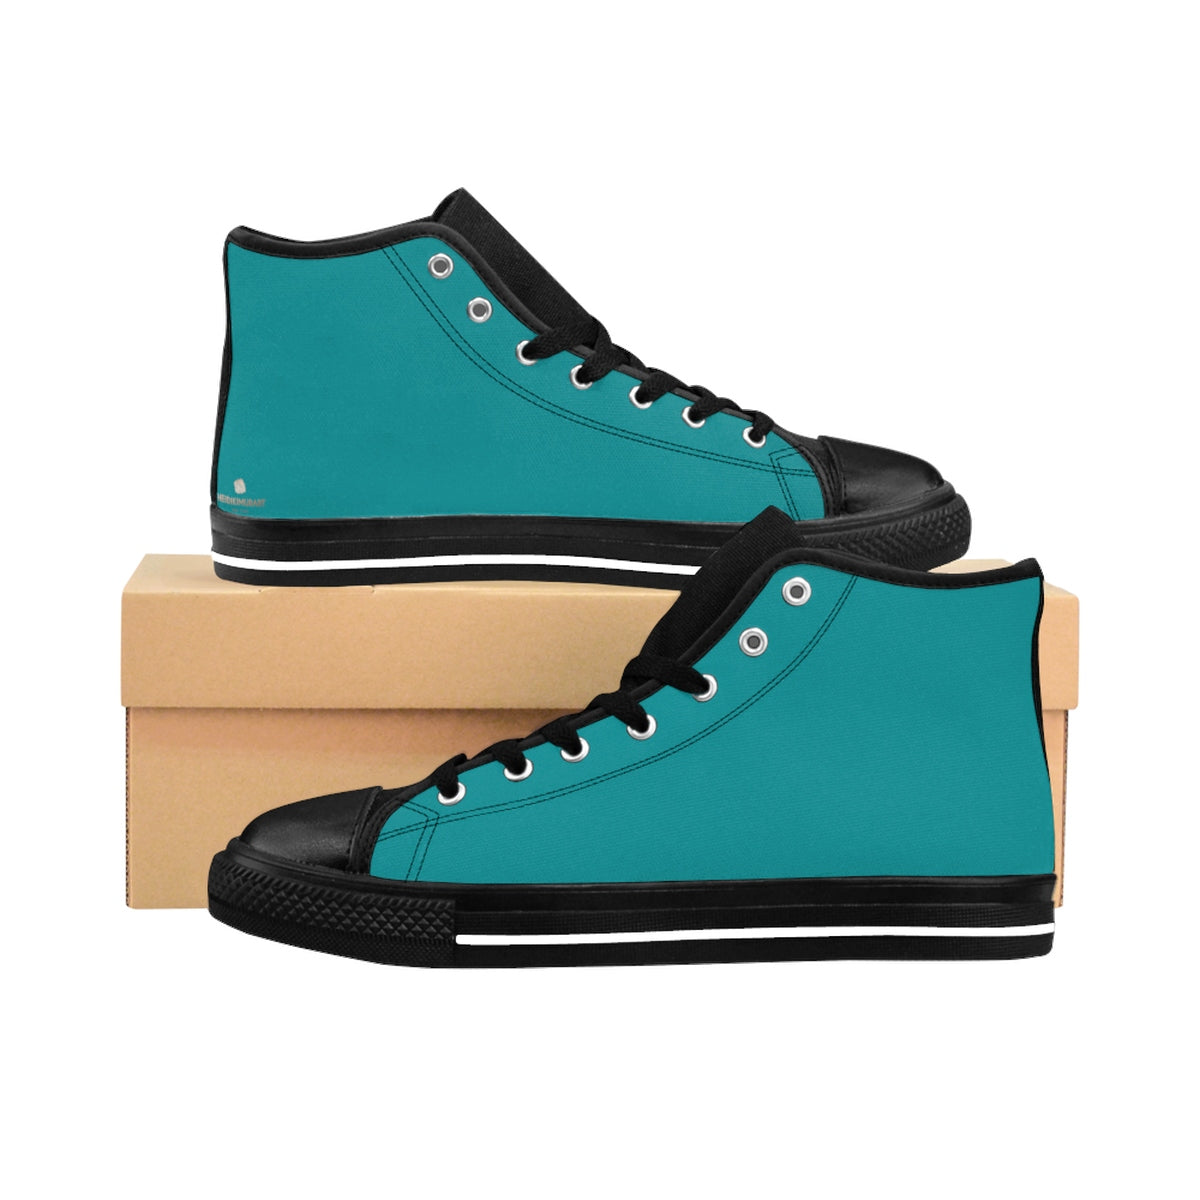 teal colored women's shoes